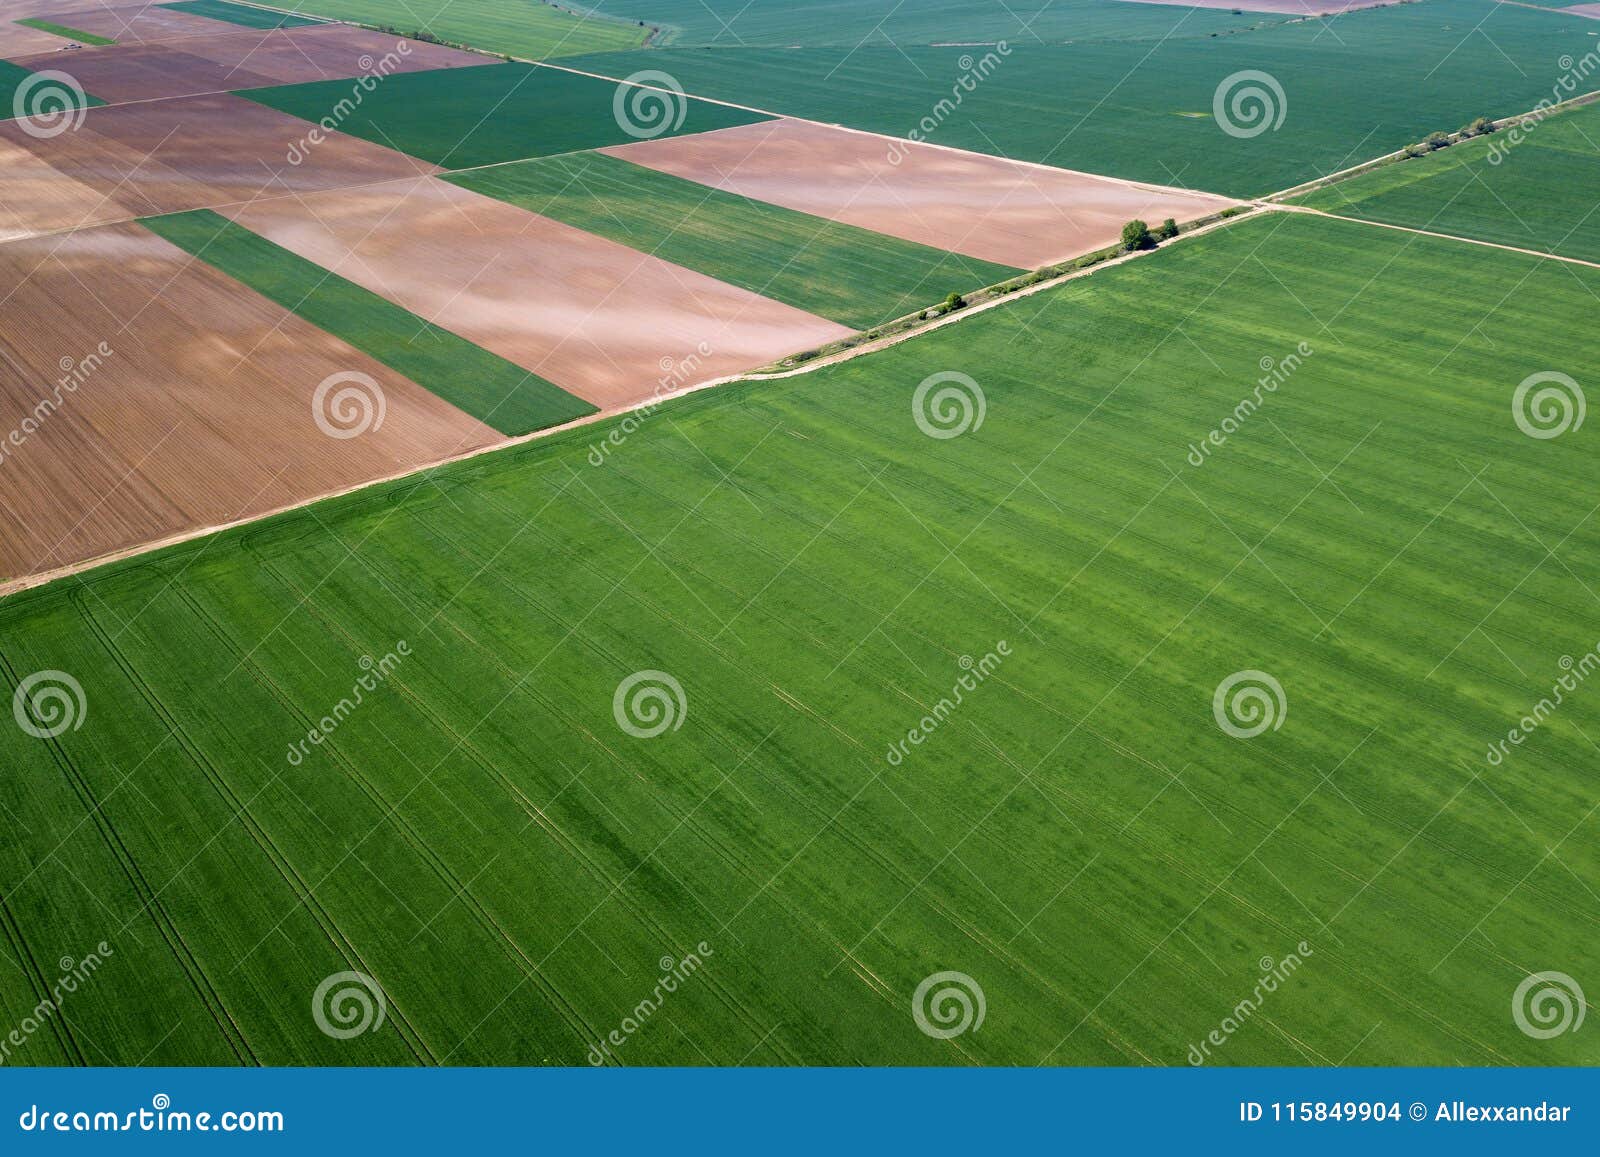 Aerial Green Wheat Field. Aerial View Large Green Field Stock Photo ...